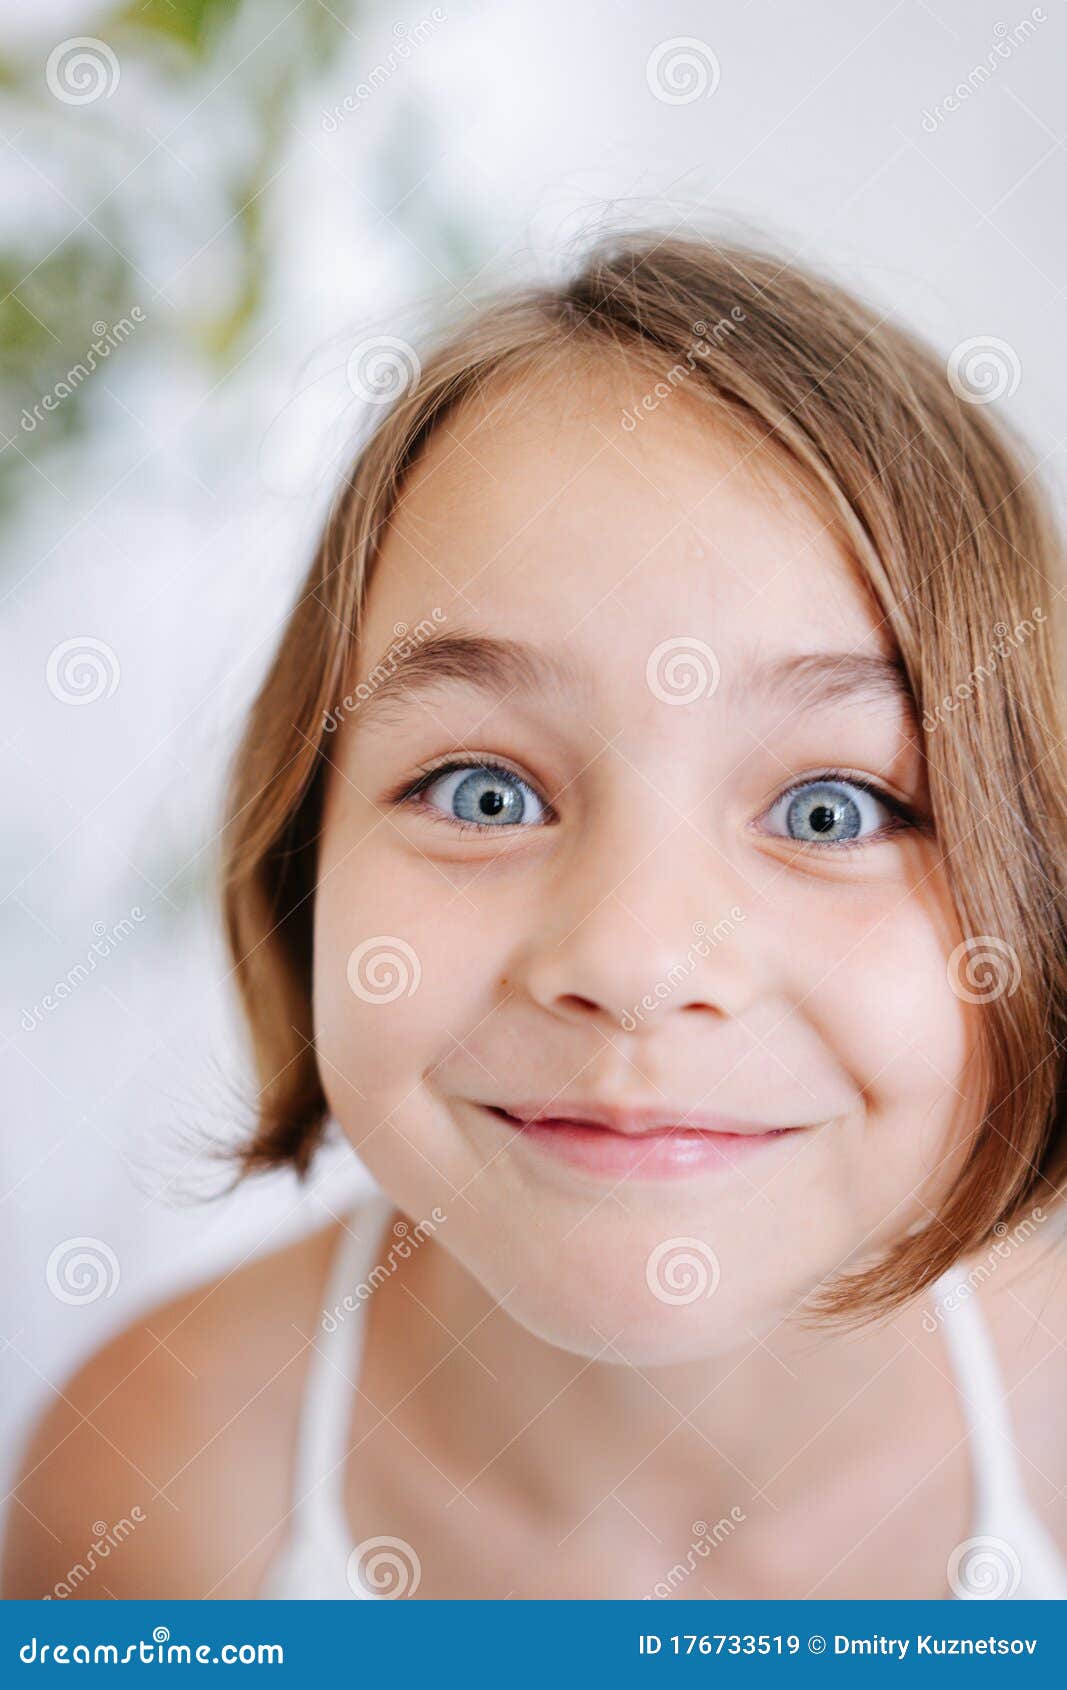 Close Up Photo of a Little Girl Making Funny Face Stock Image ...